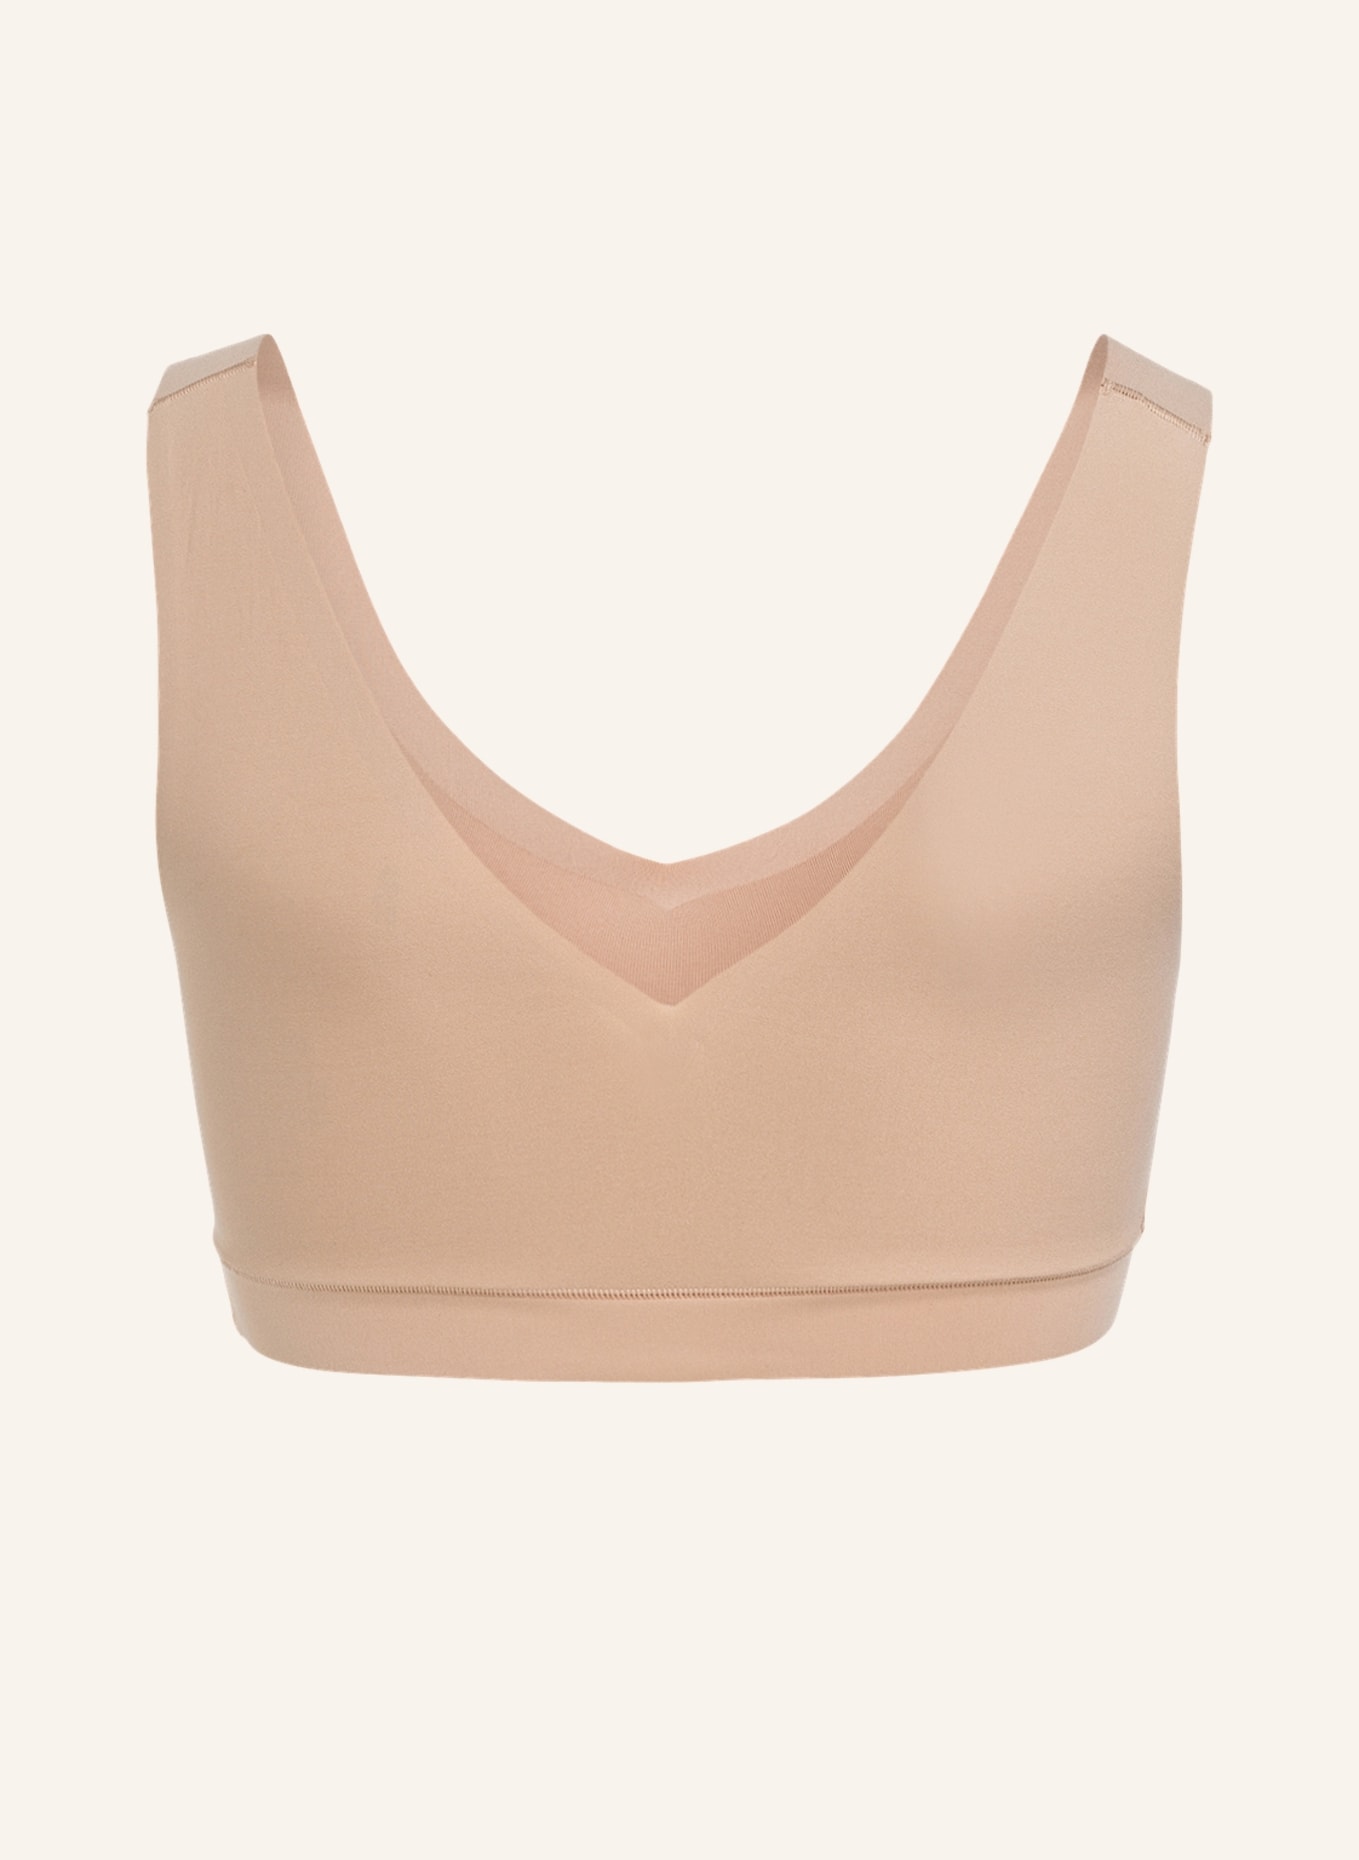 CHANTELLE Bustier SOFTSTRETCH, Farbe: NUDE (Bild 2)